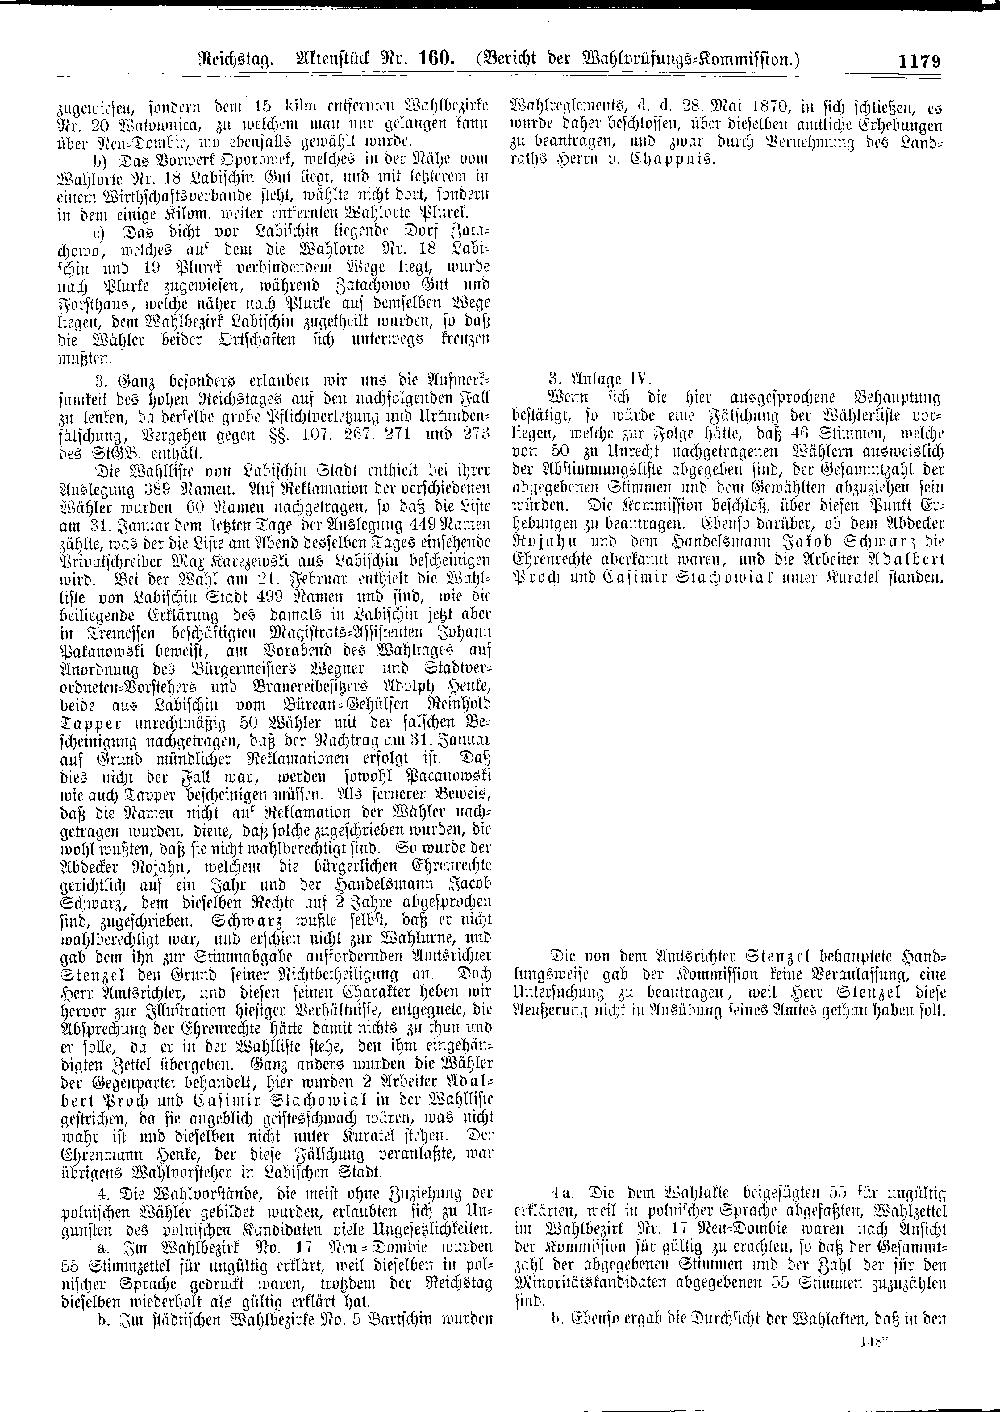 Scan of page 1179